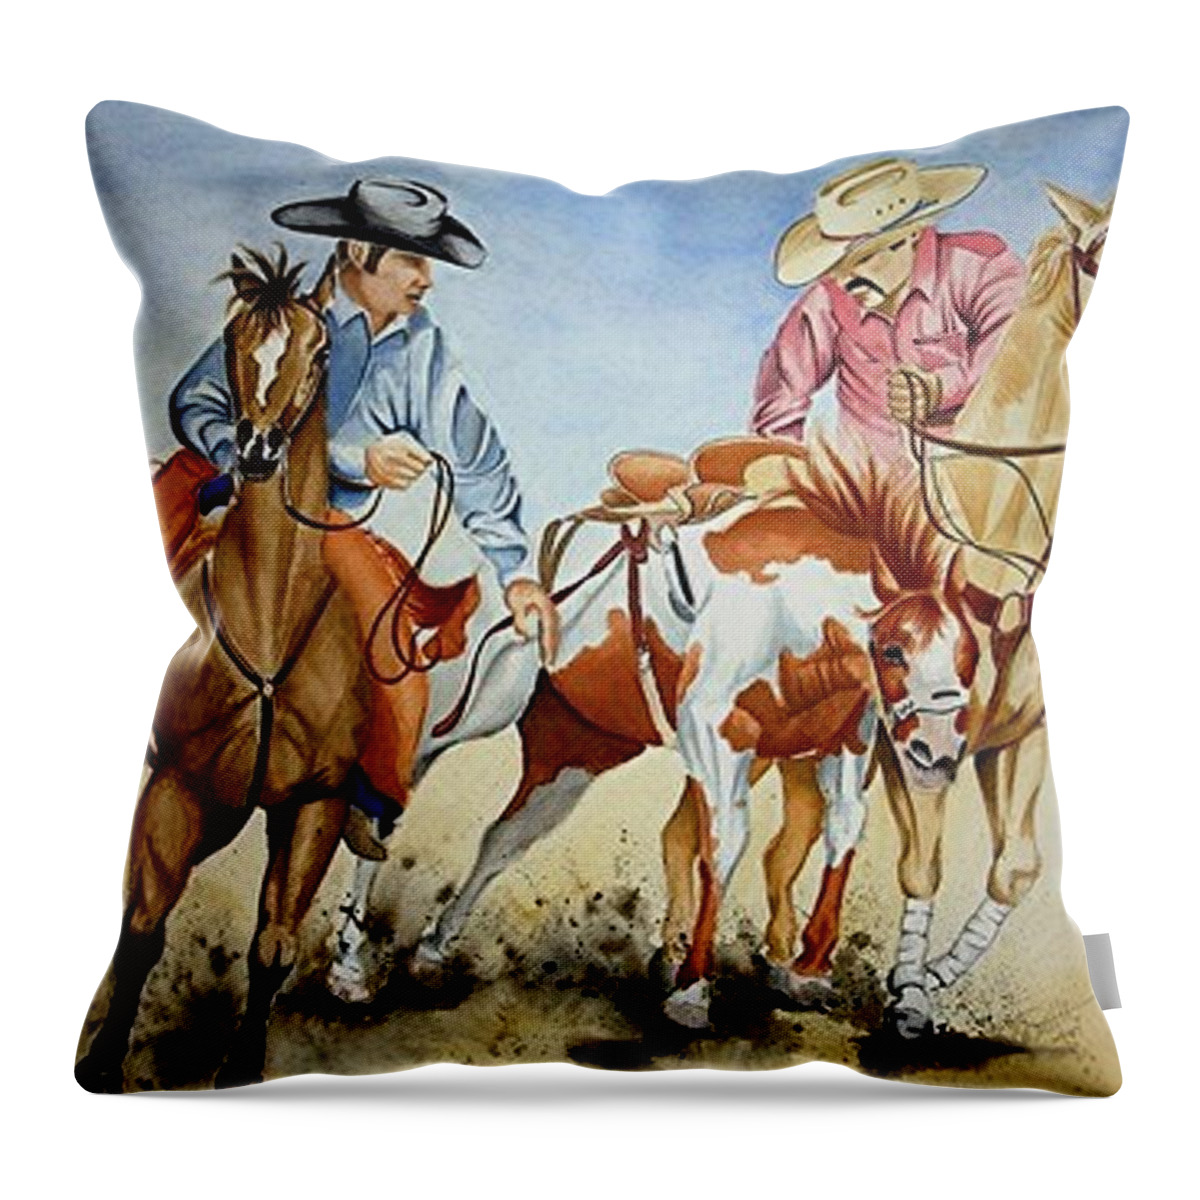 Art Throw Pillow featuring the painting Victory Dance #1 by Jimmy Smith